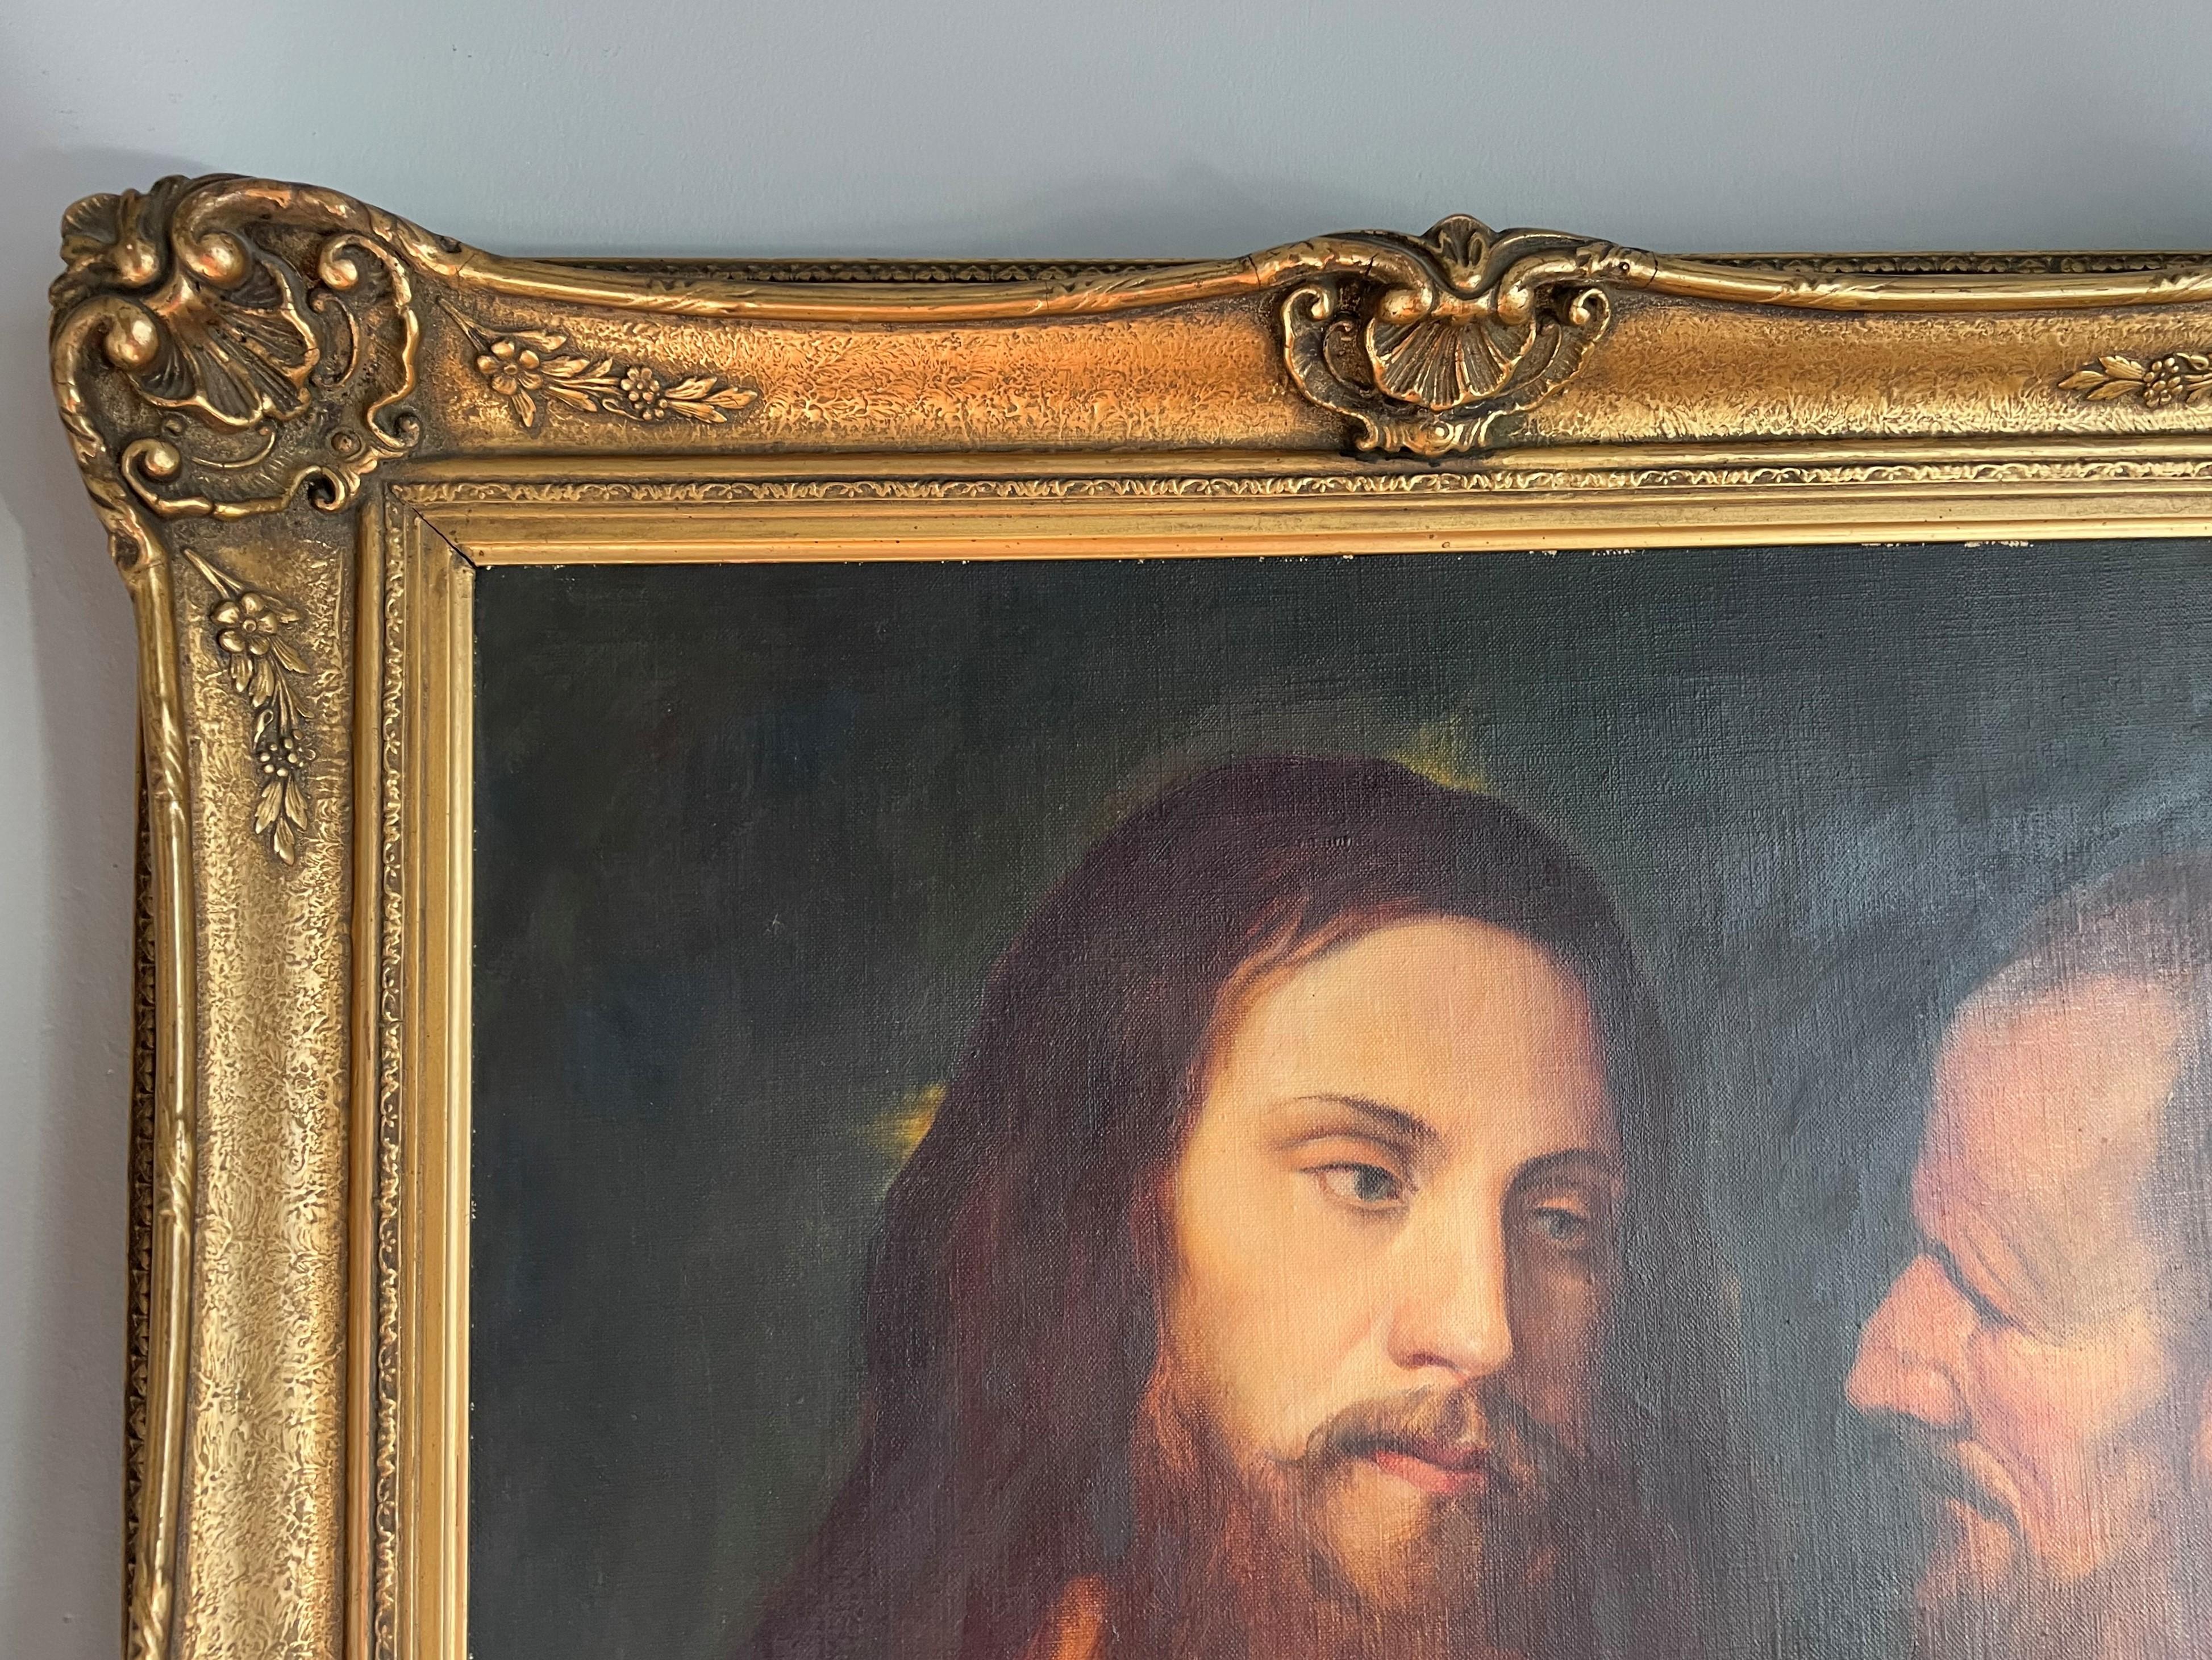 Gothic Revival Good Size Hand Painted Antique Oil on Canvas Painting of Jesus Christ and Judas